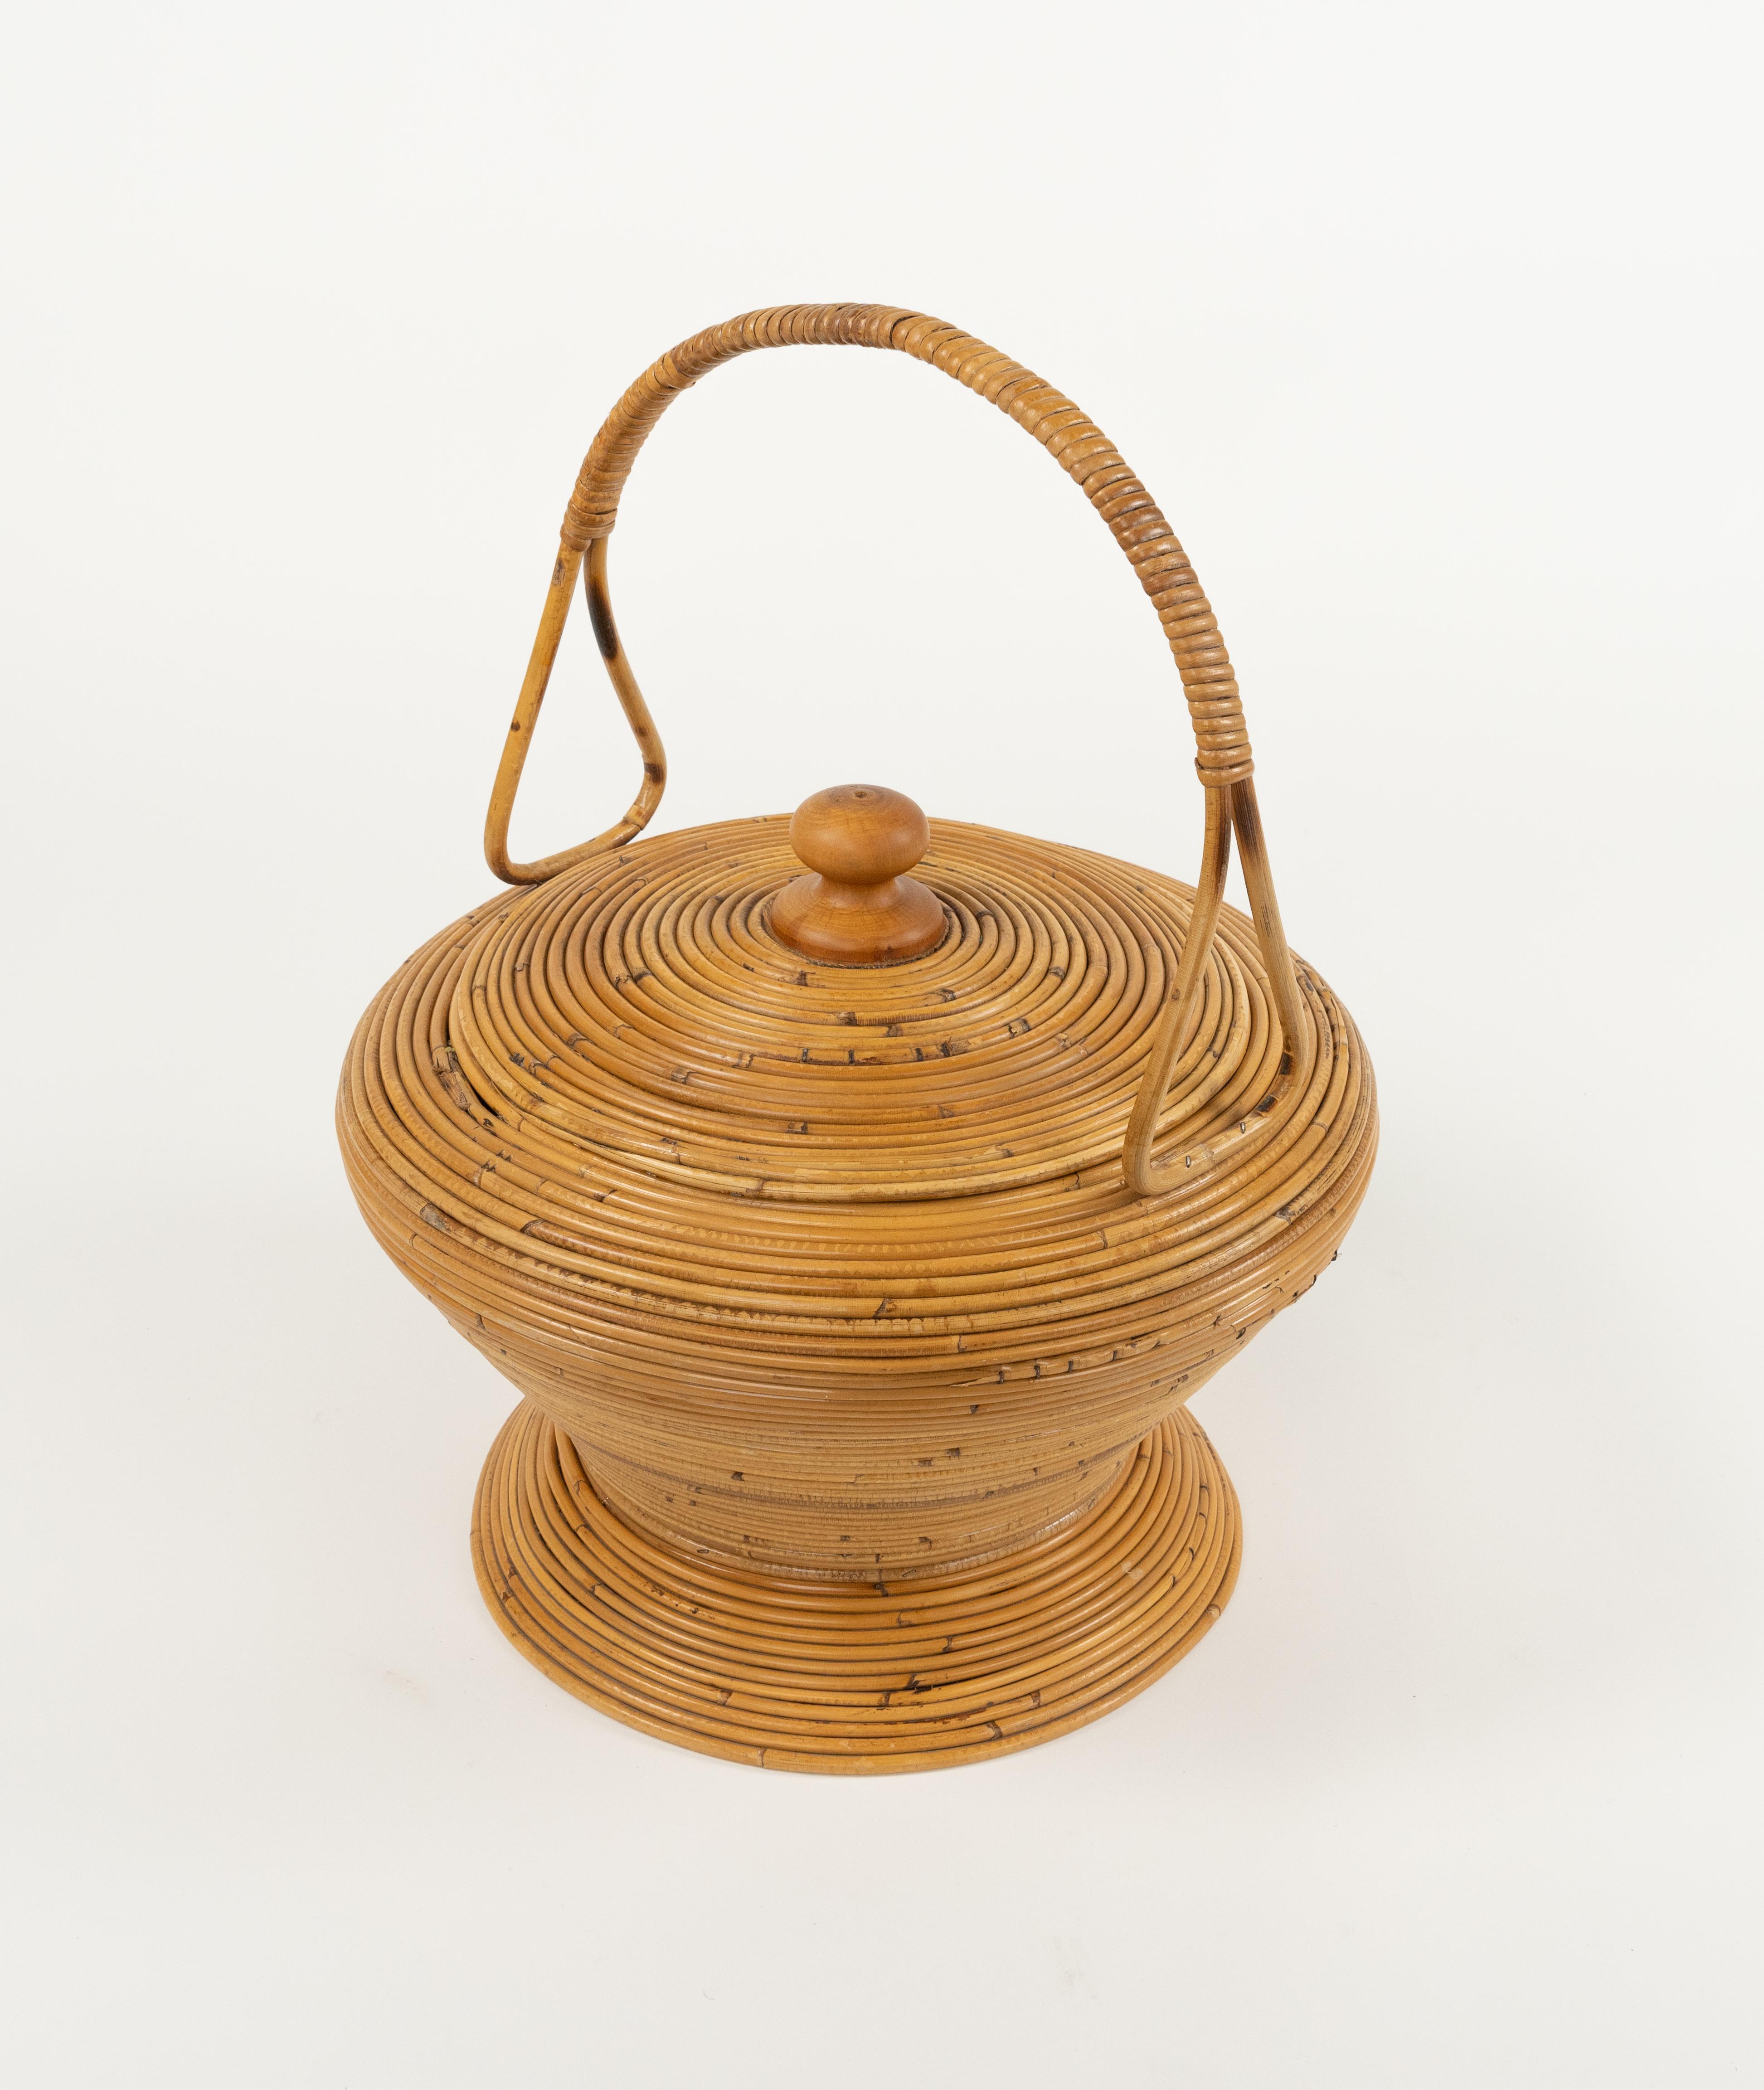 Mid-Century Modern Midcentury Rattan Decorative Basket by Vivai Del Sud, Italy 1960s For Sale